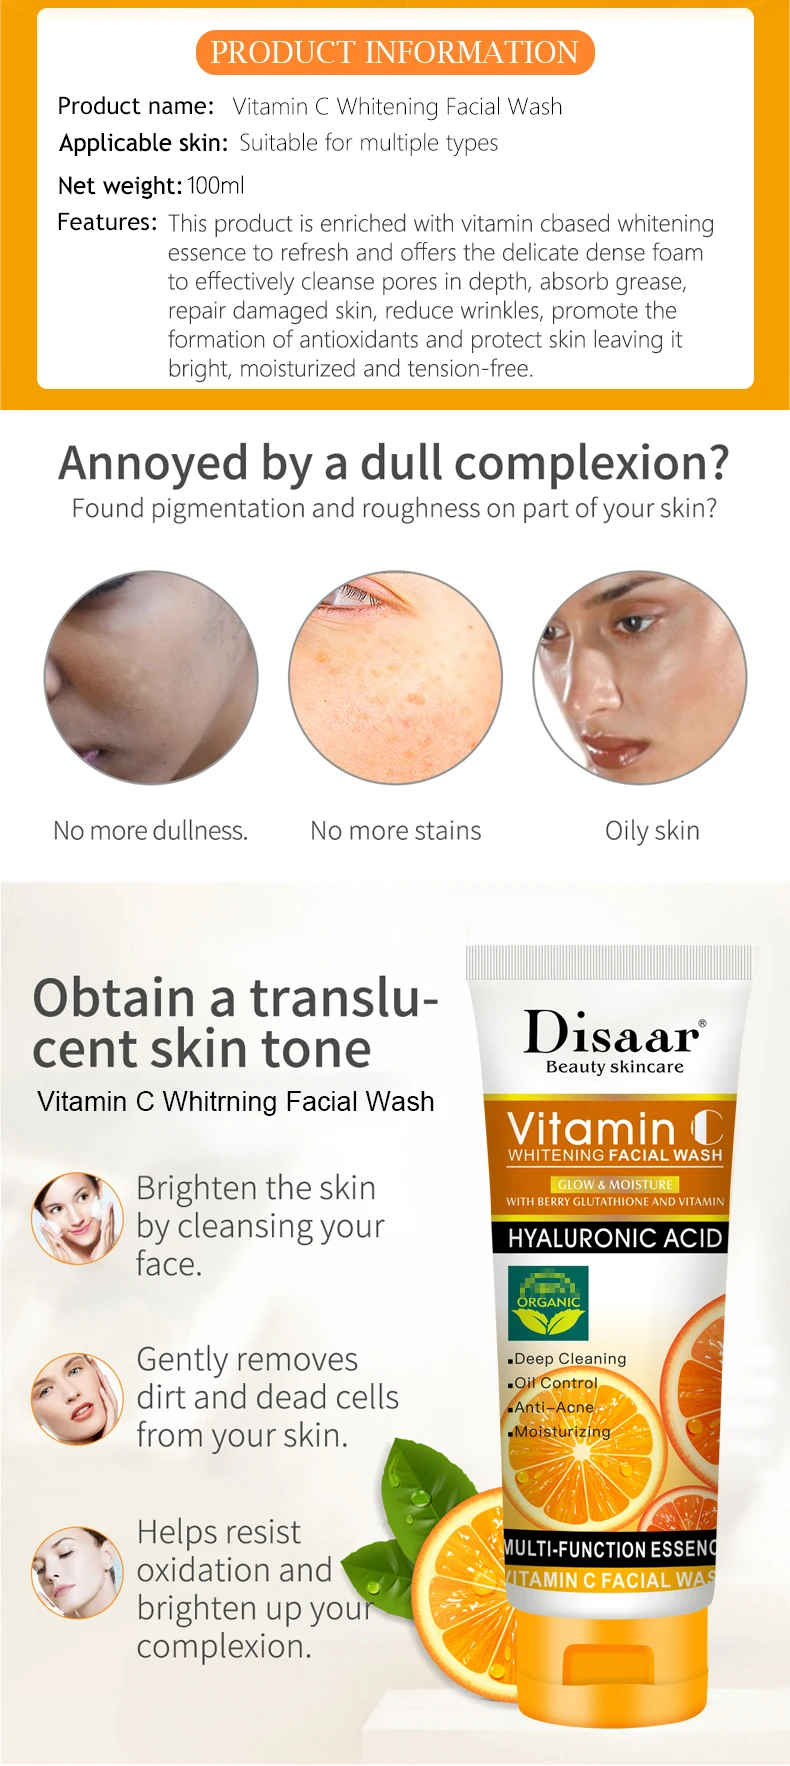 Disaar vitamin c face wash facial cleanser deep cleansing whitening skin care face wash for all skin types